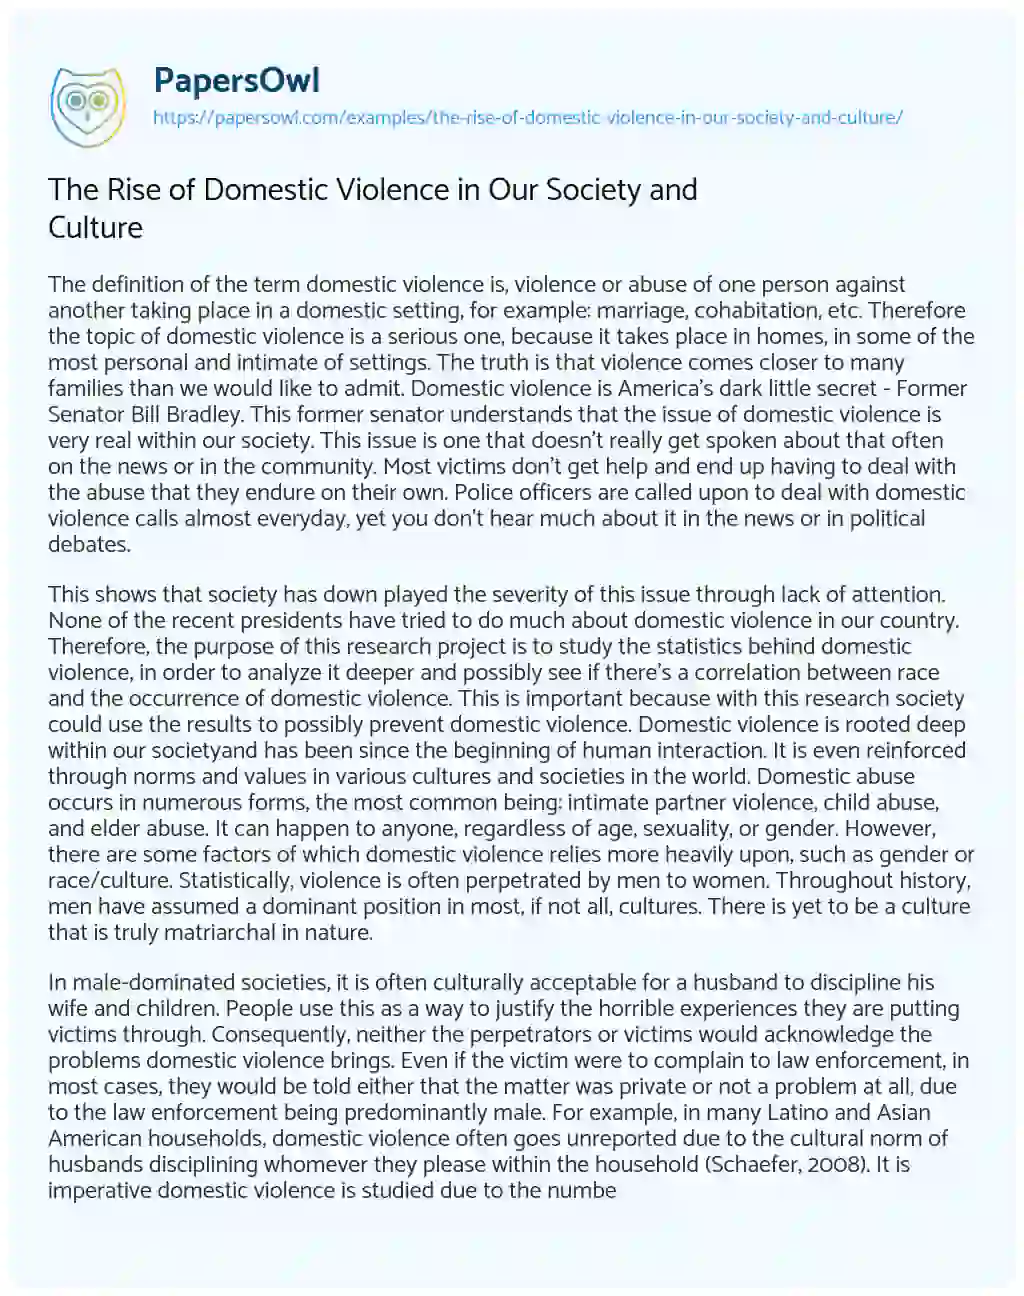 The Rise of Domestic Violence in our Society and Culture essay